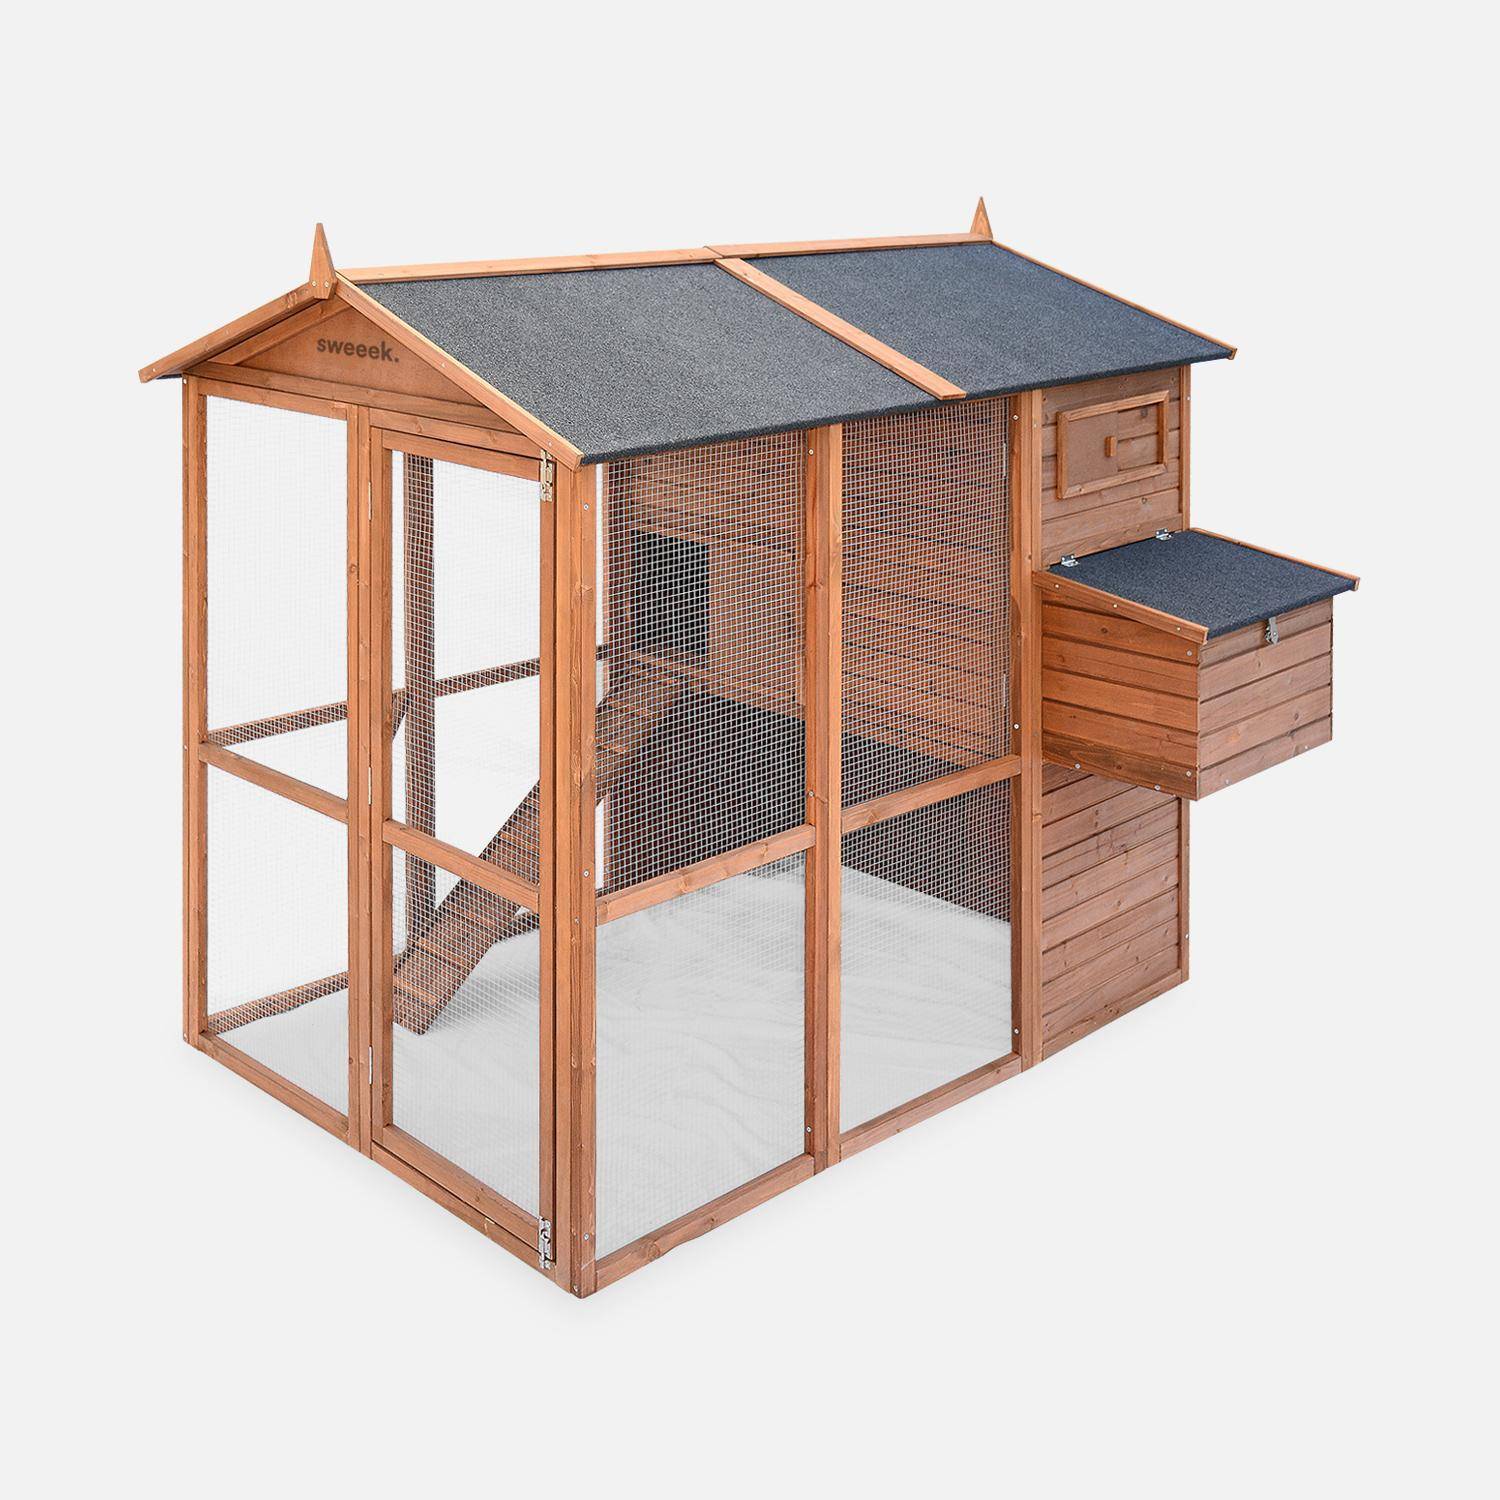 Wooden chicken coop - backyard hen cage for 6 to 8 chickens, indoor and outdoor space - Cotentine - Wood colour,sweeek,Photo4